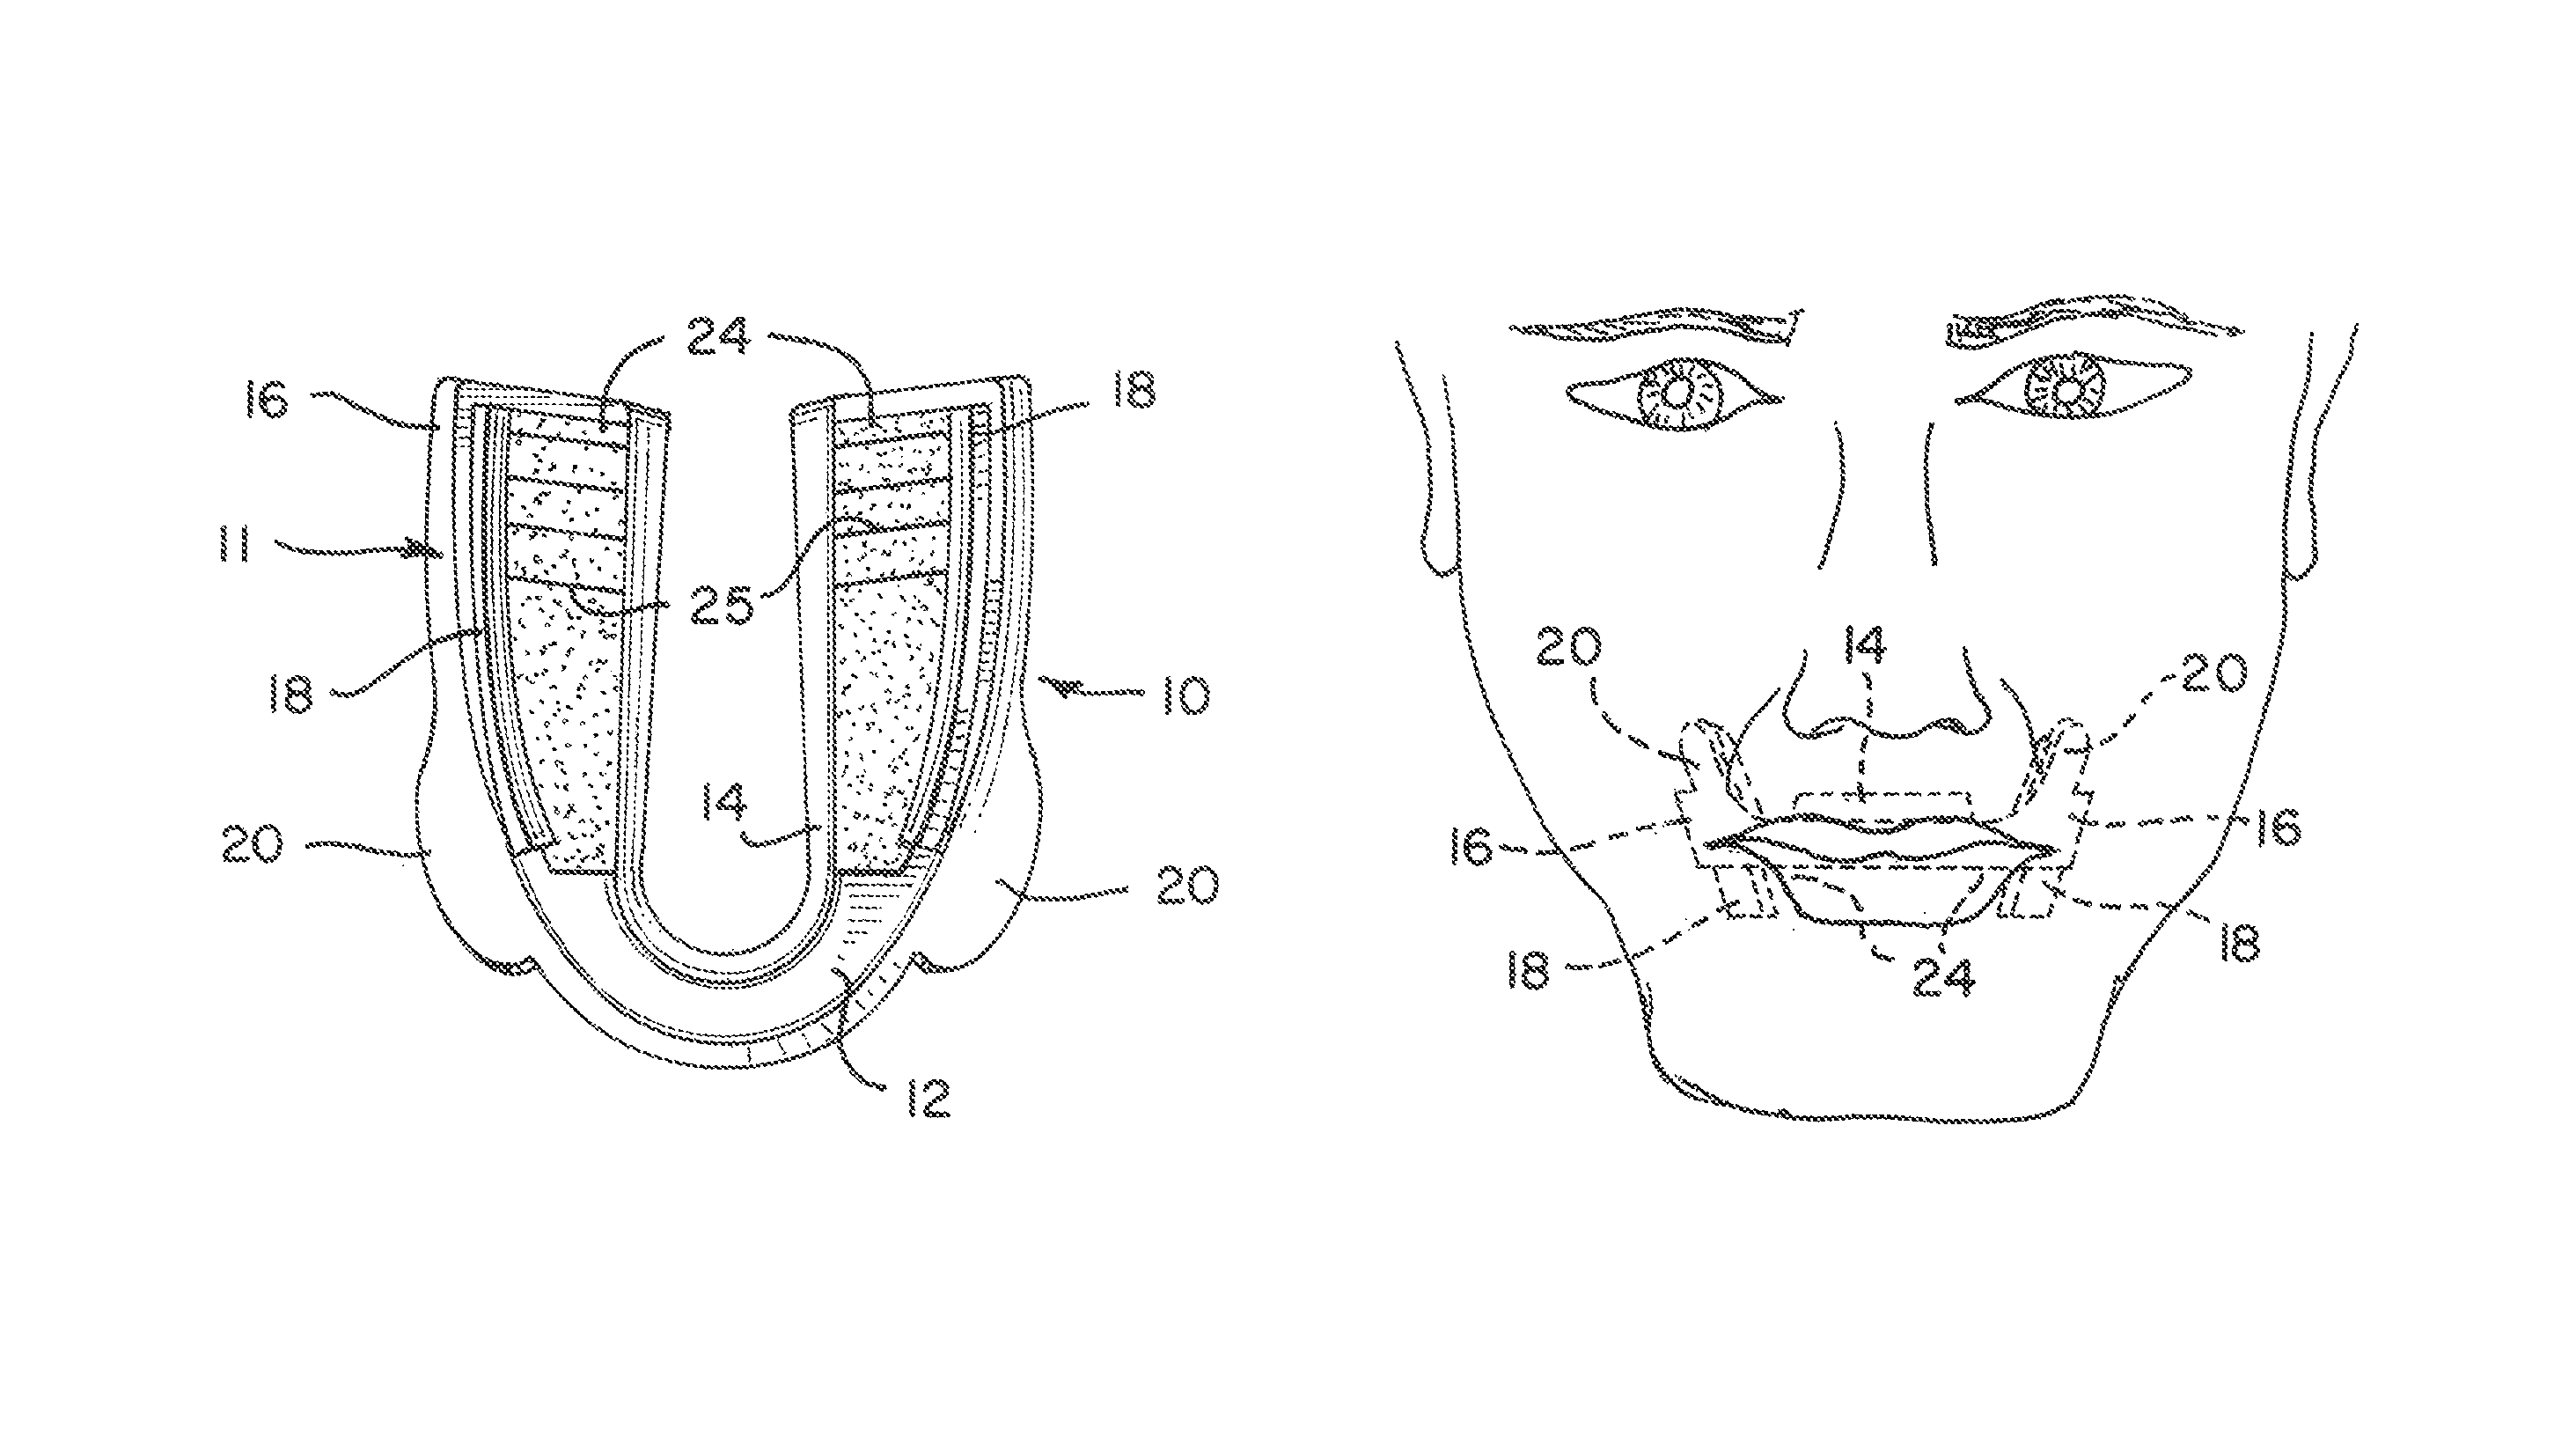 Dental appliance and method of fitting